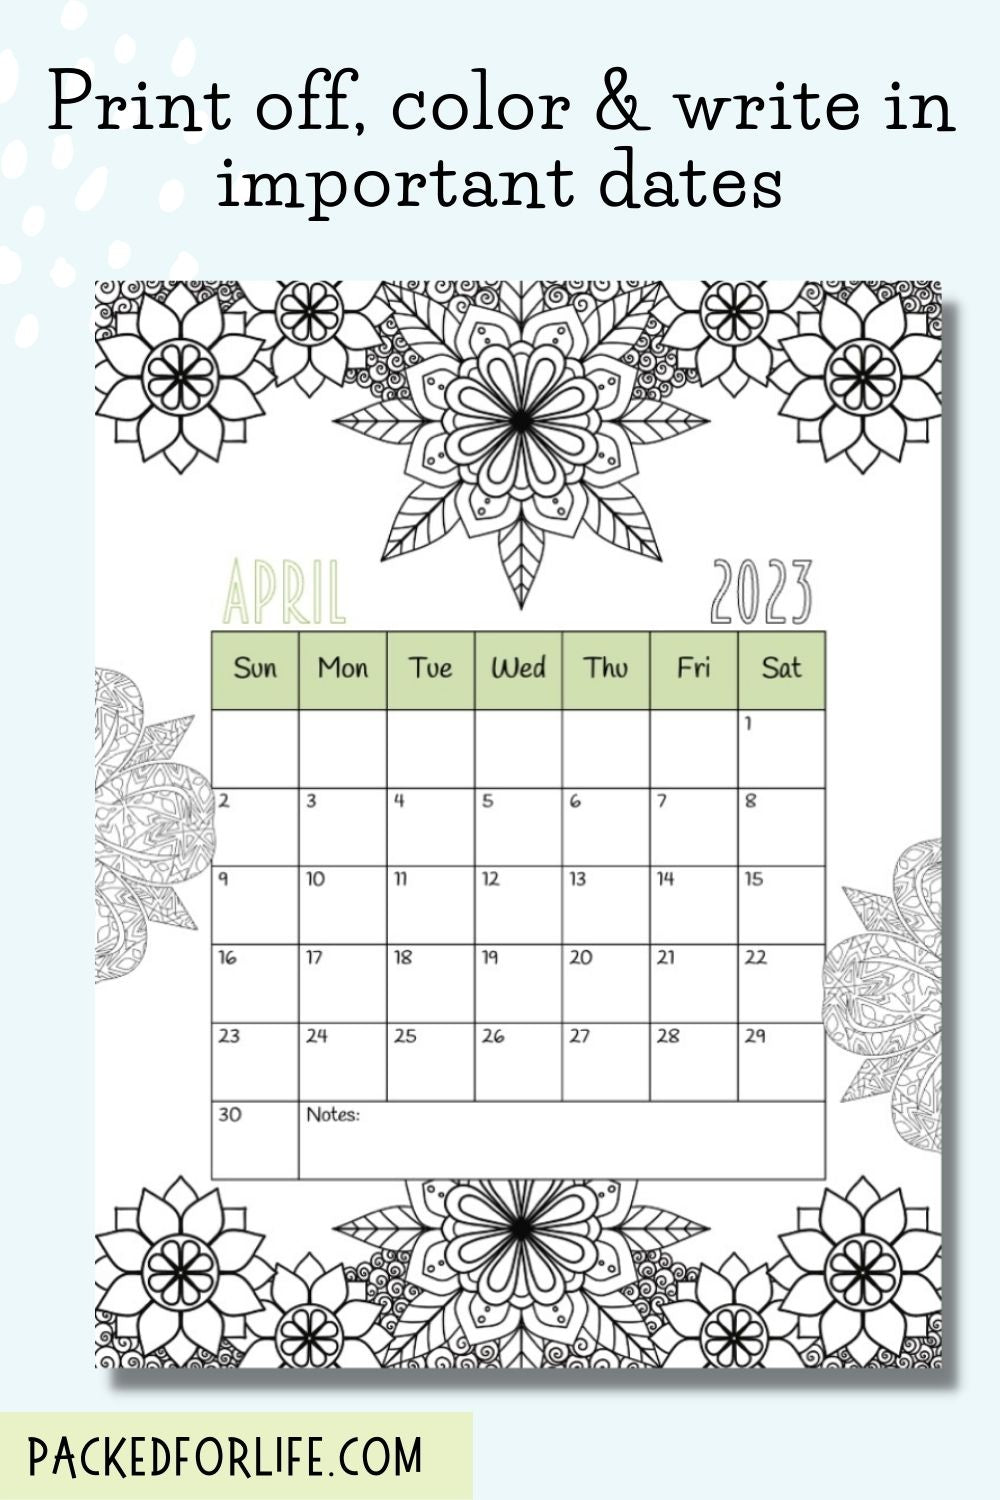 2023-printable-coloring-calendar-packed-for-life